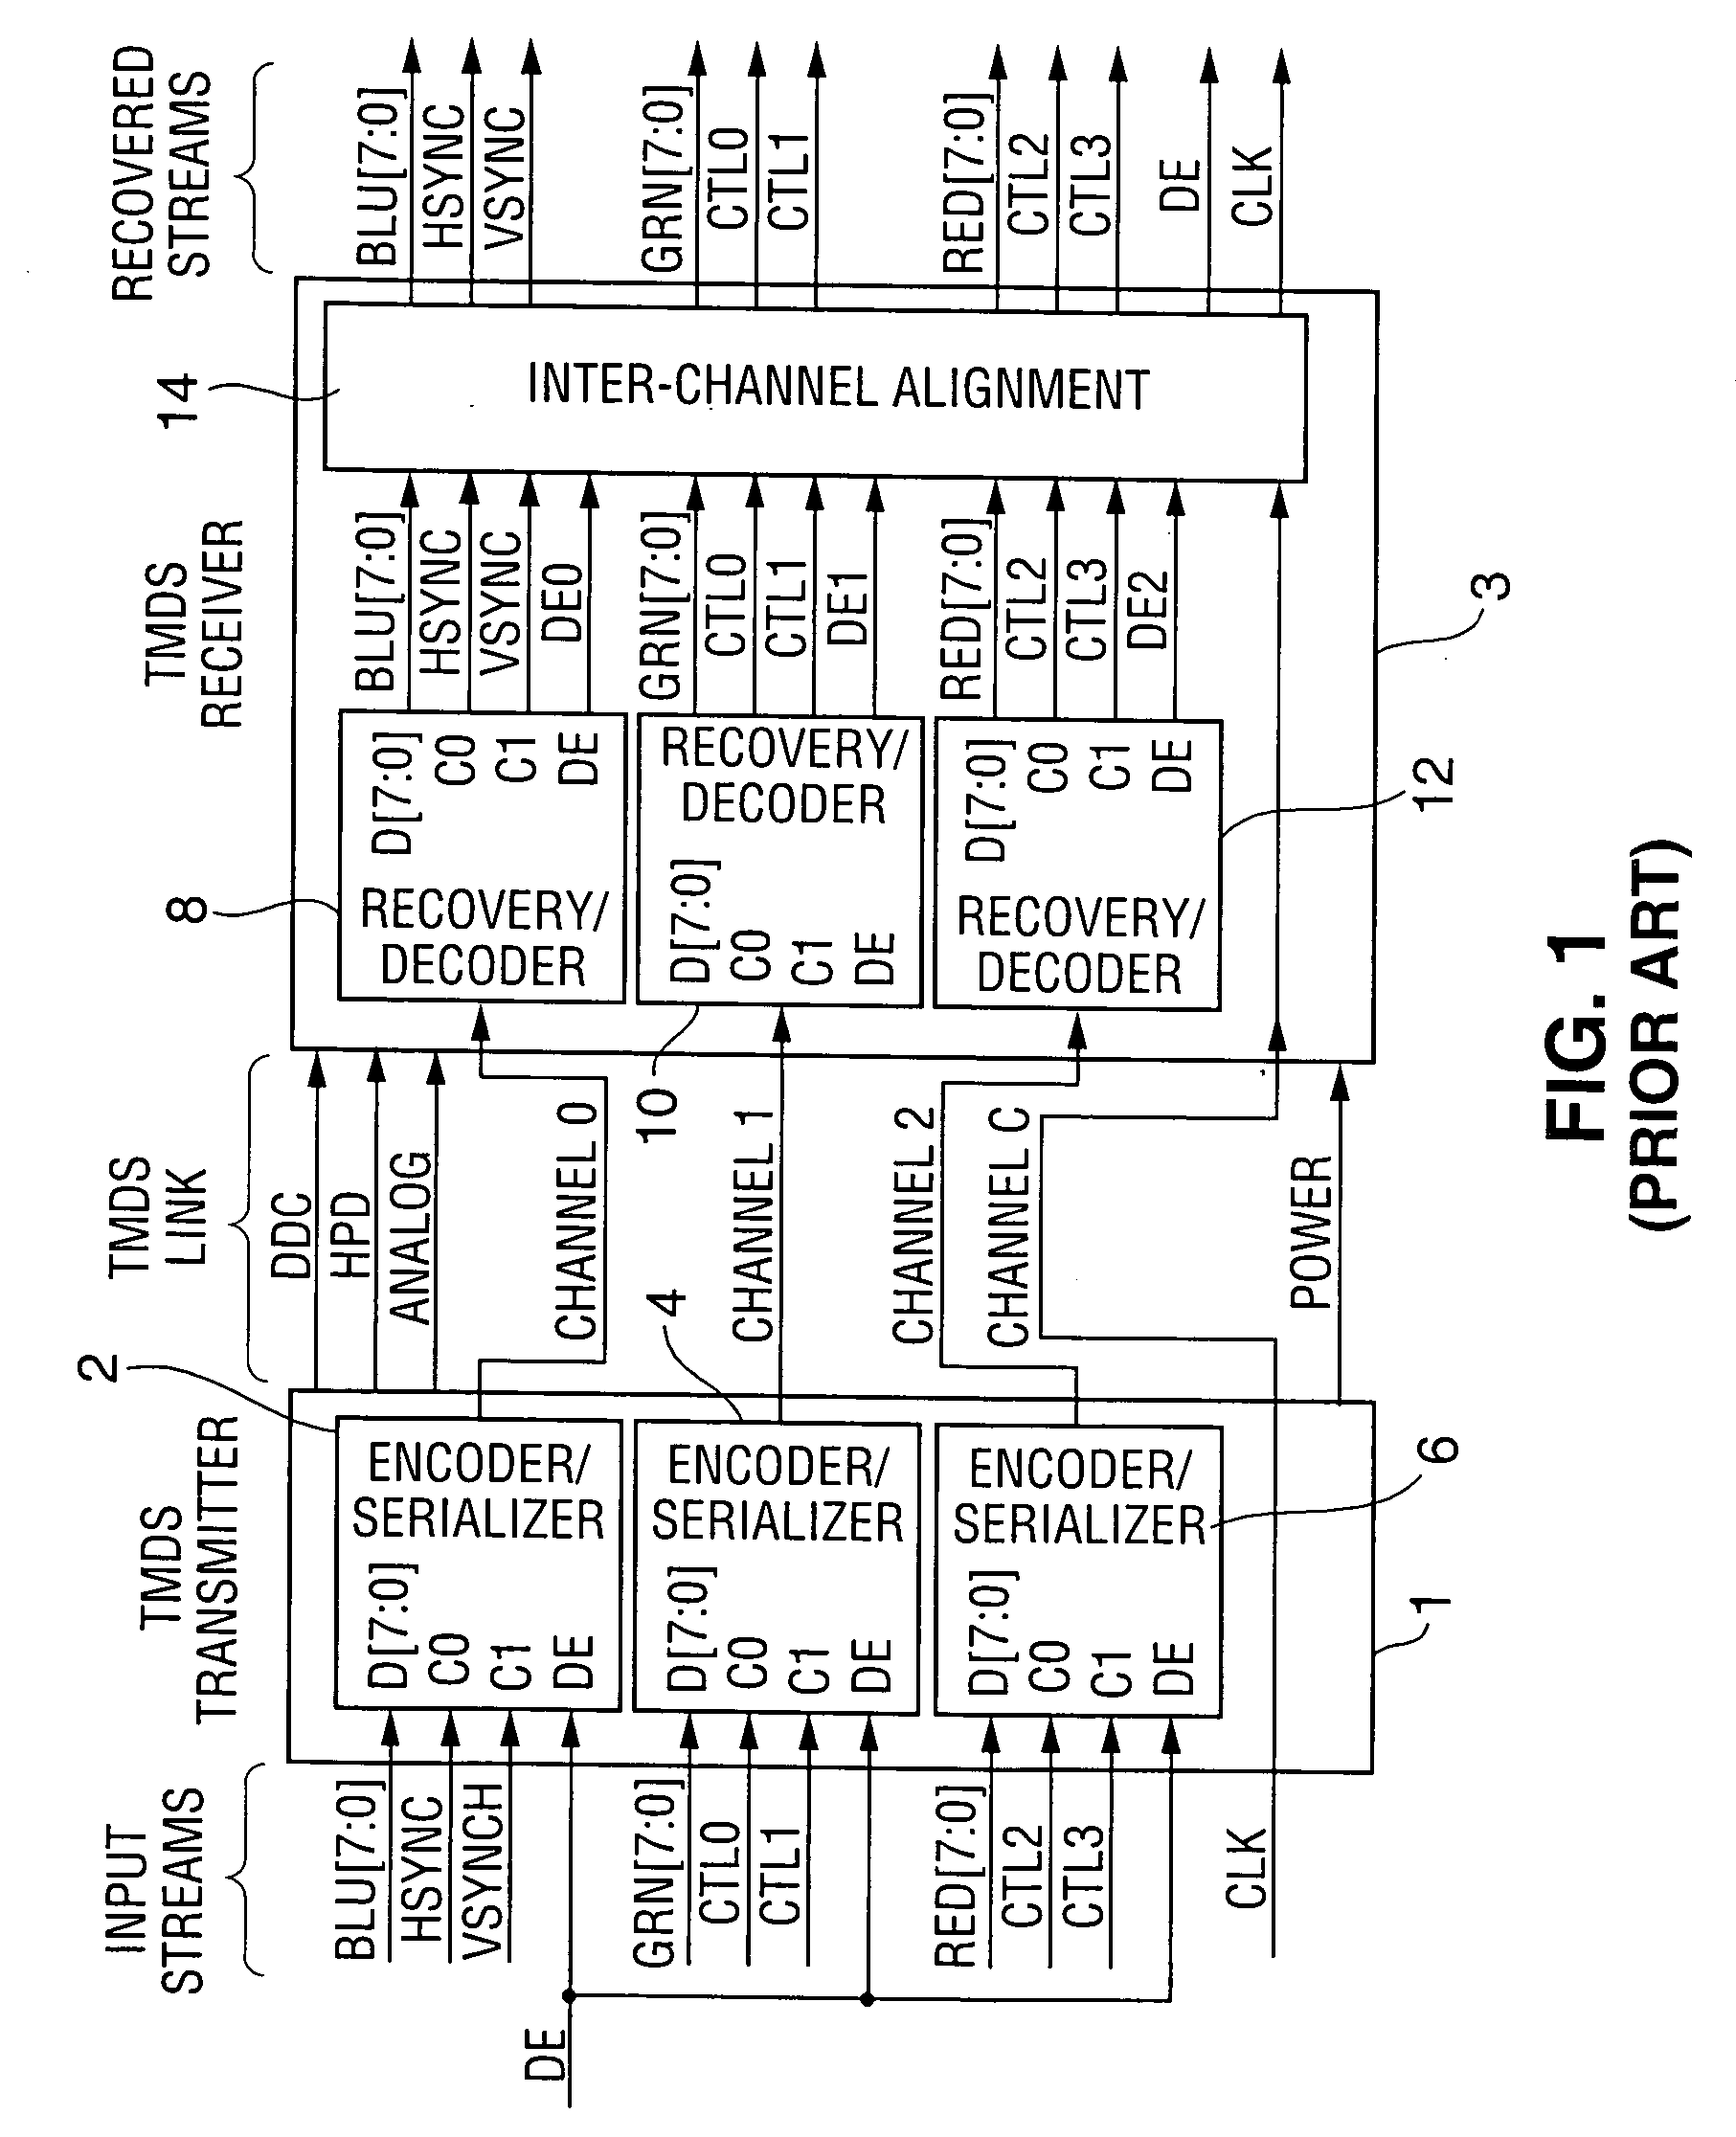 Method and apparatus for encrypting data transmitted over a serial link